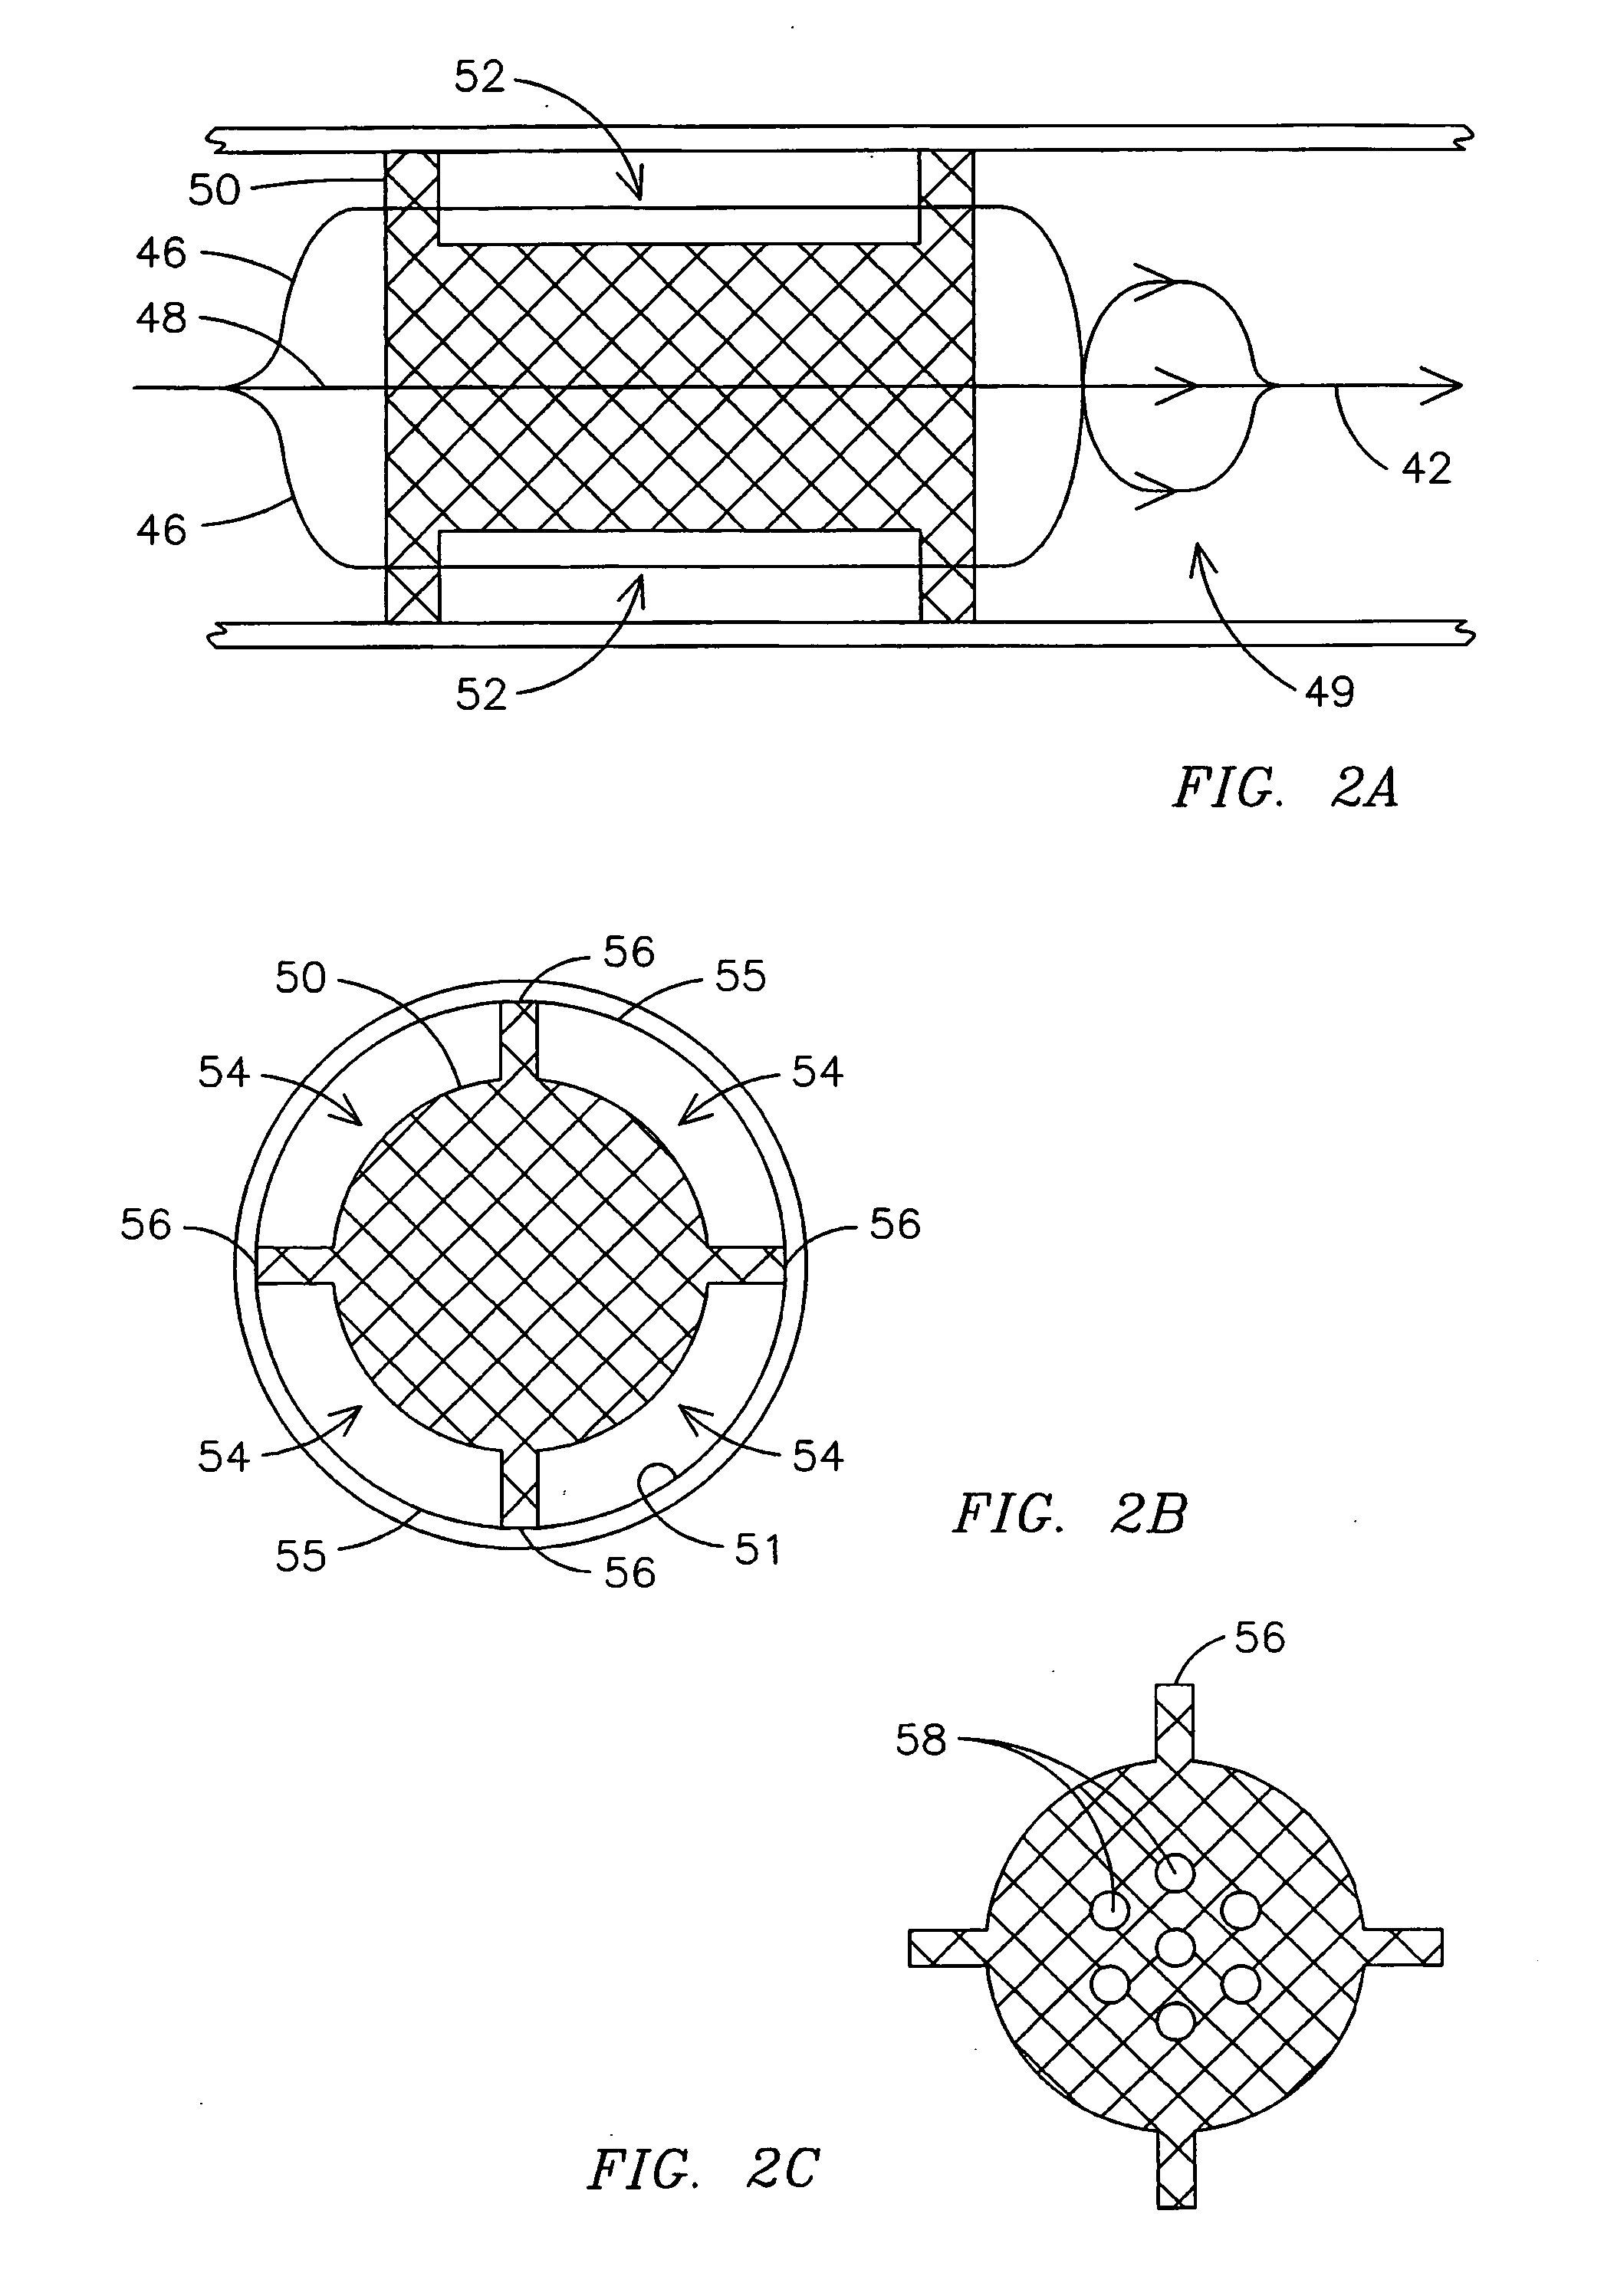 Two stage catalytic combustor